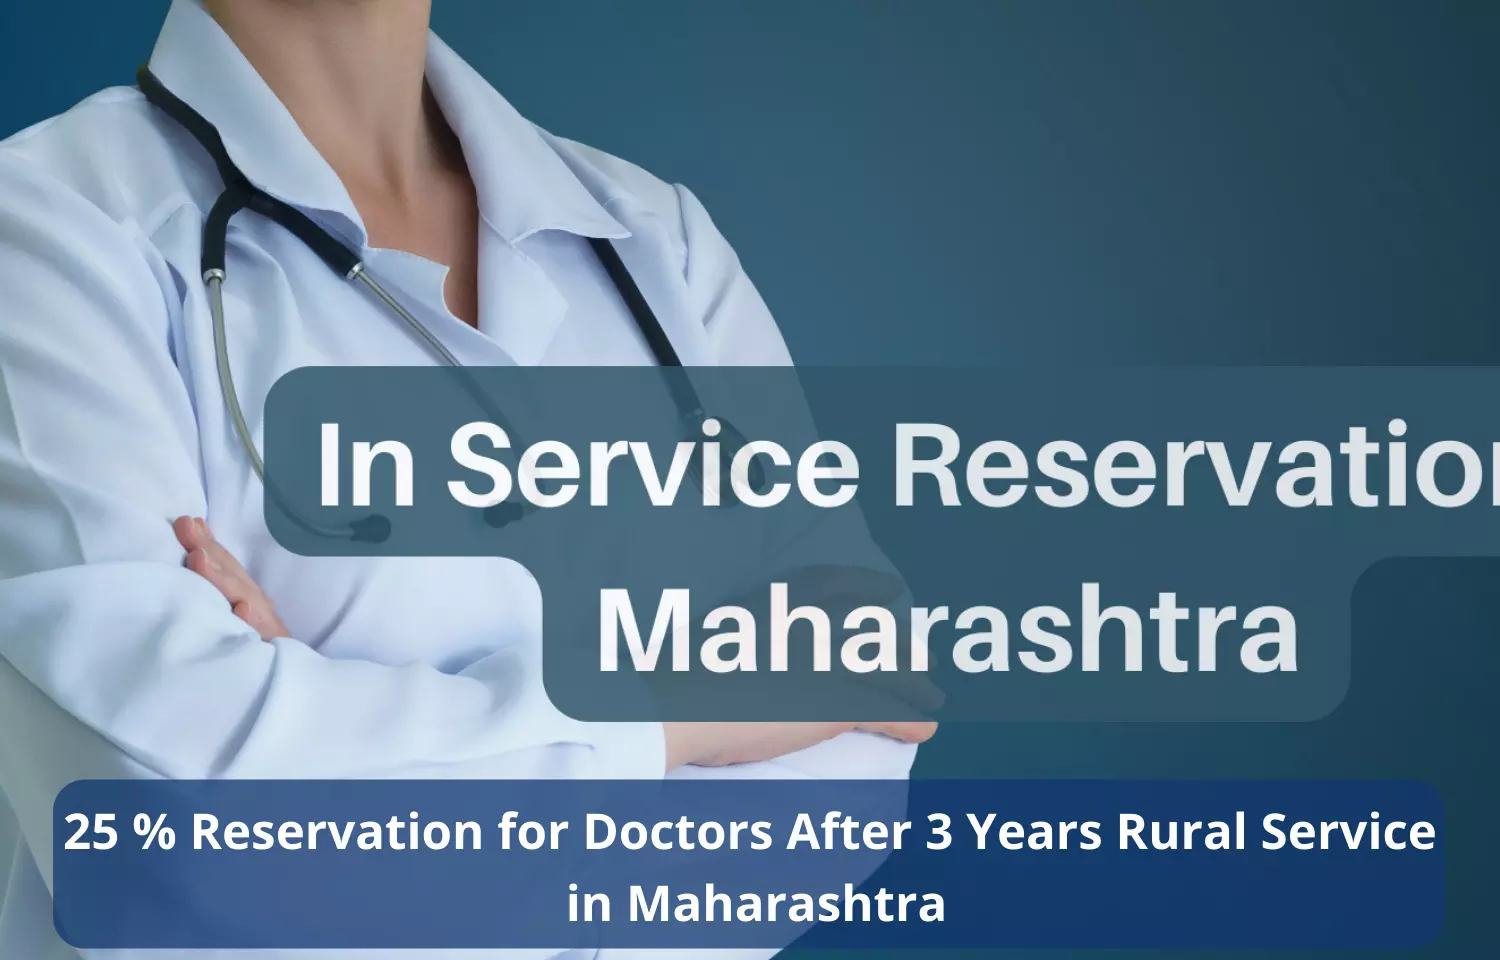 Maharashtra : 25 percent reservation for doctors after 3 years rural service